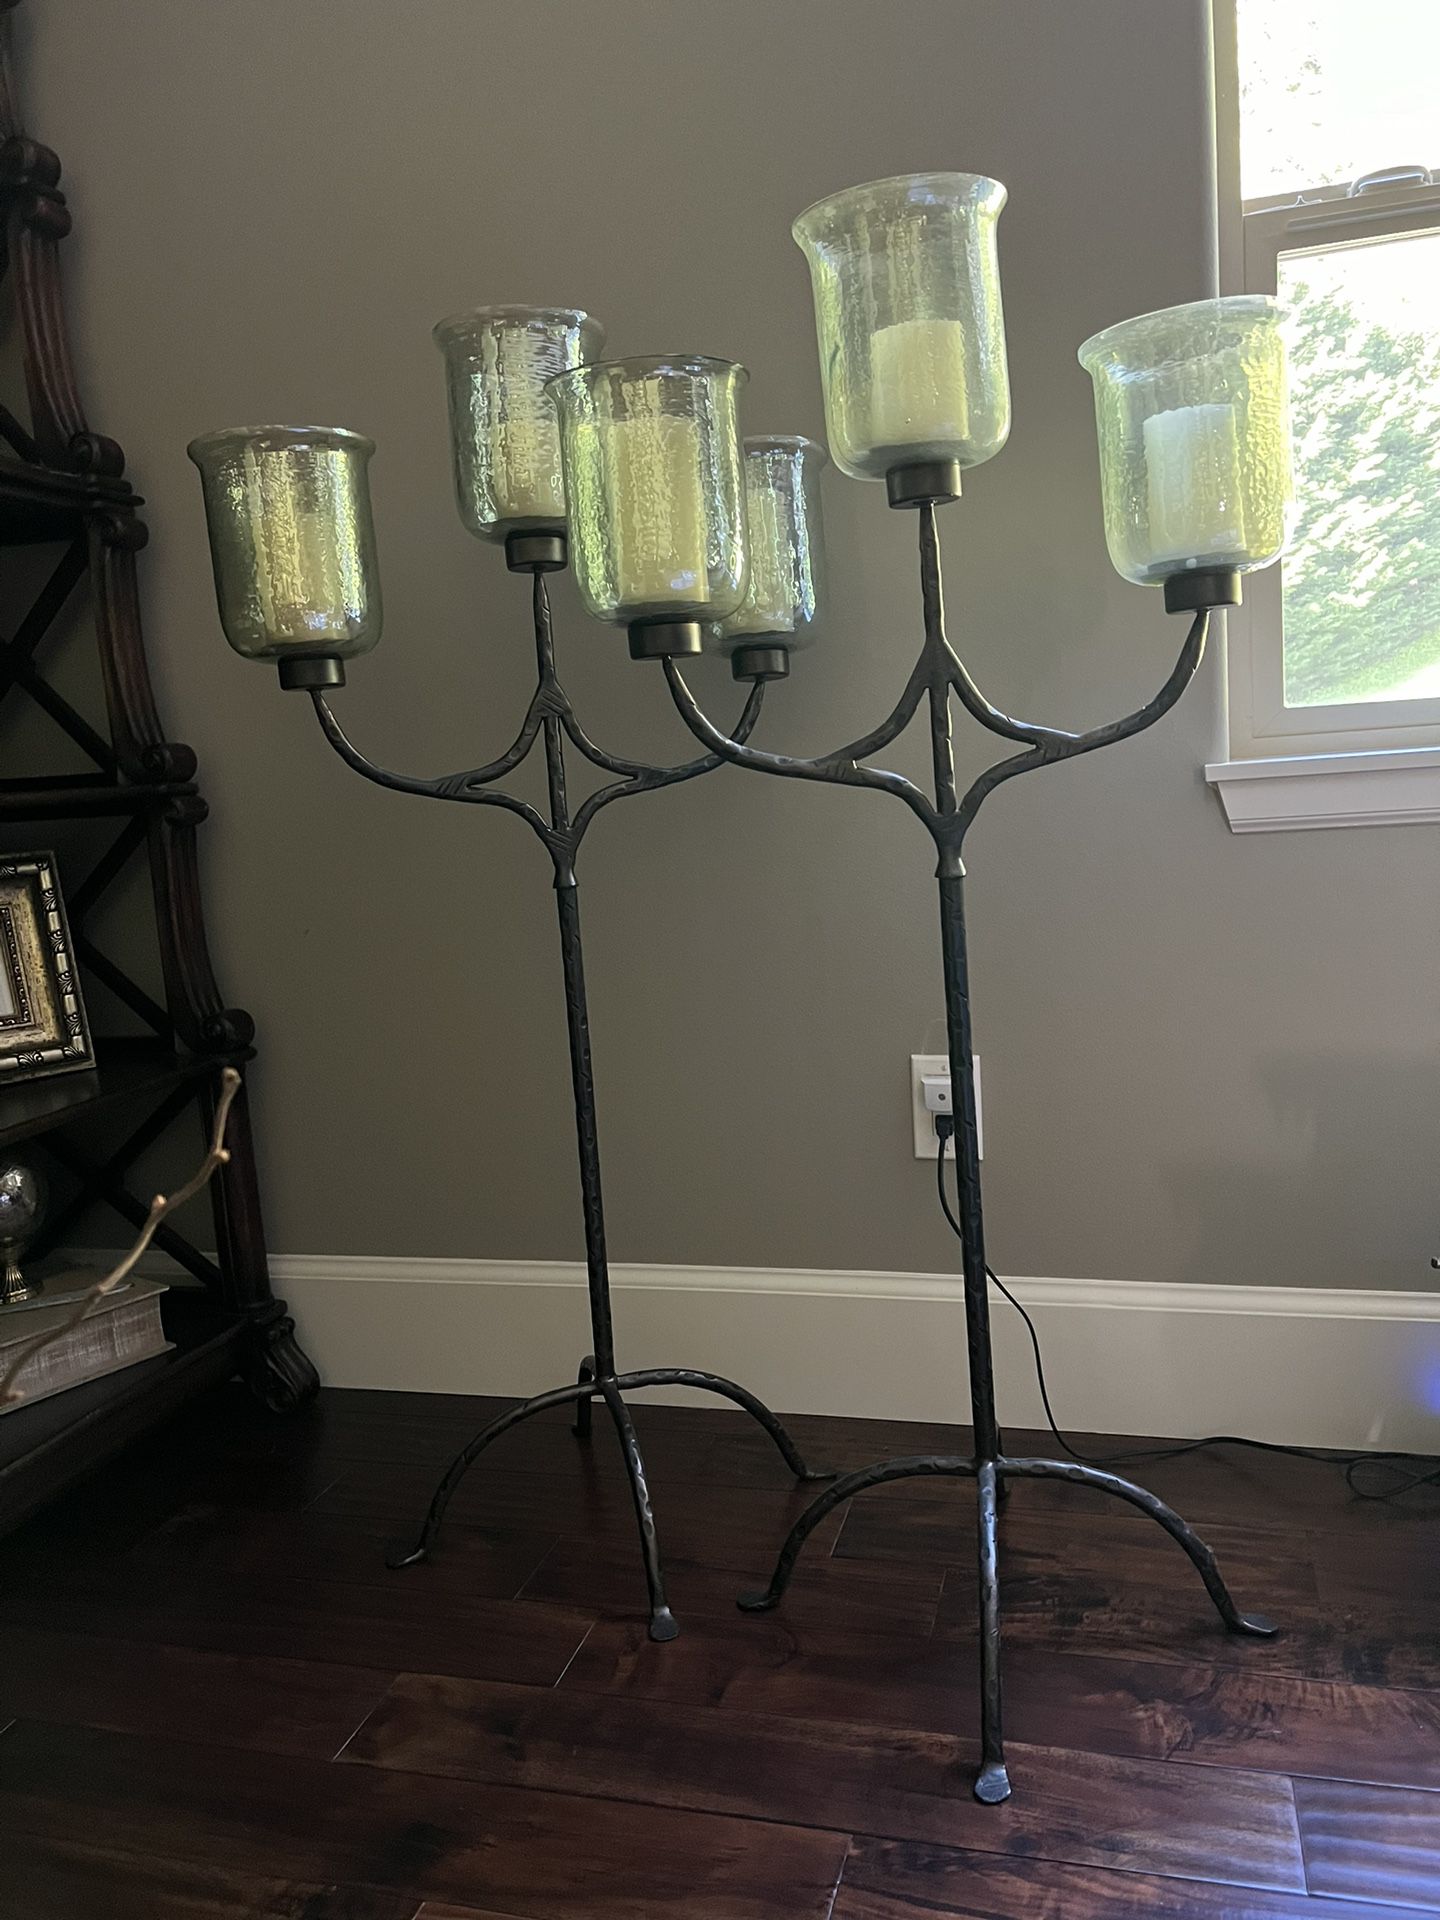 2 Glass Candle Holders Stand Home Decor